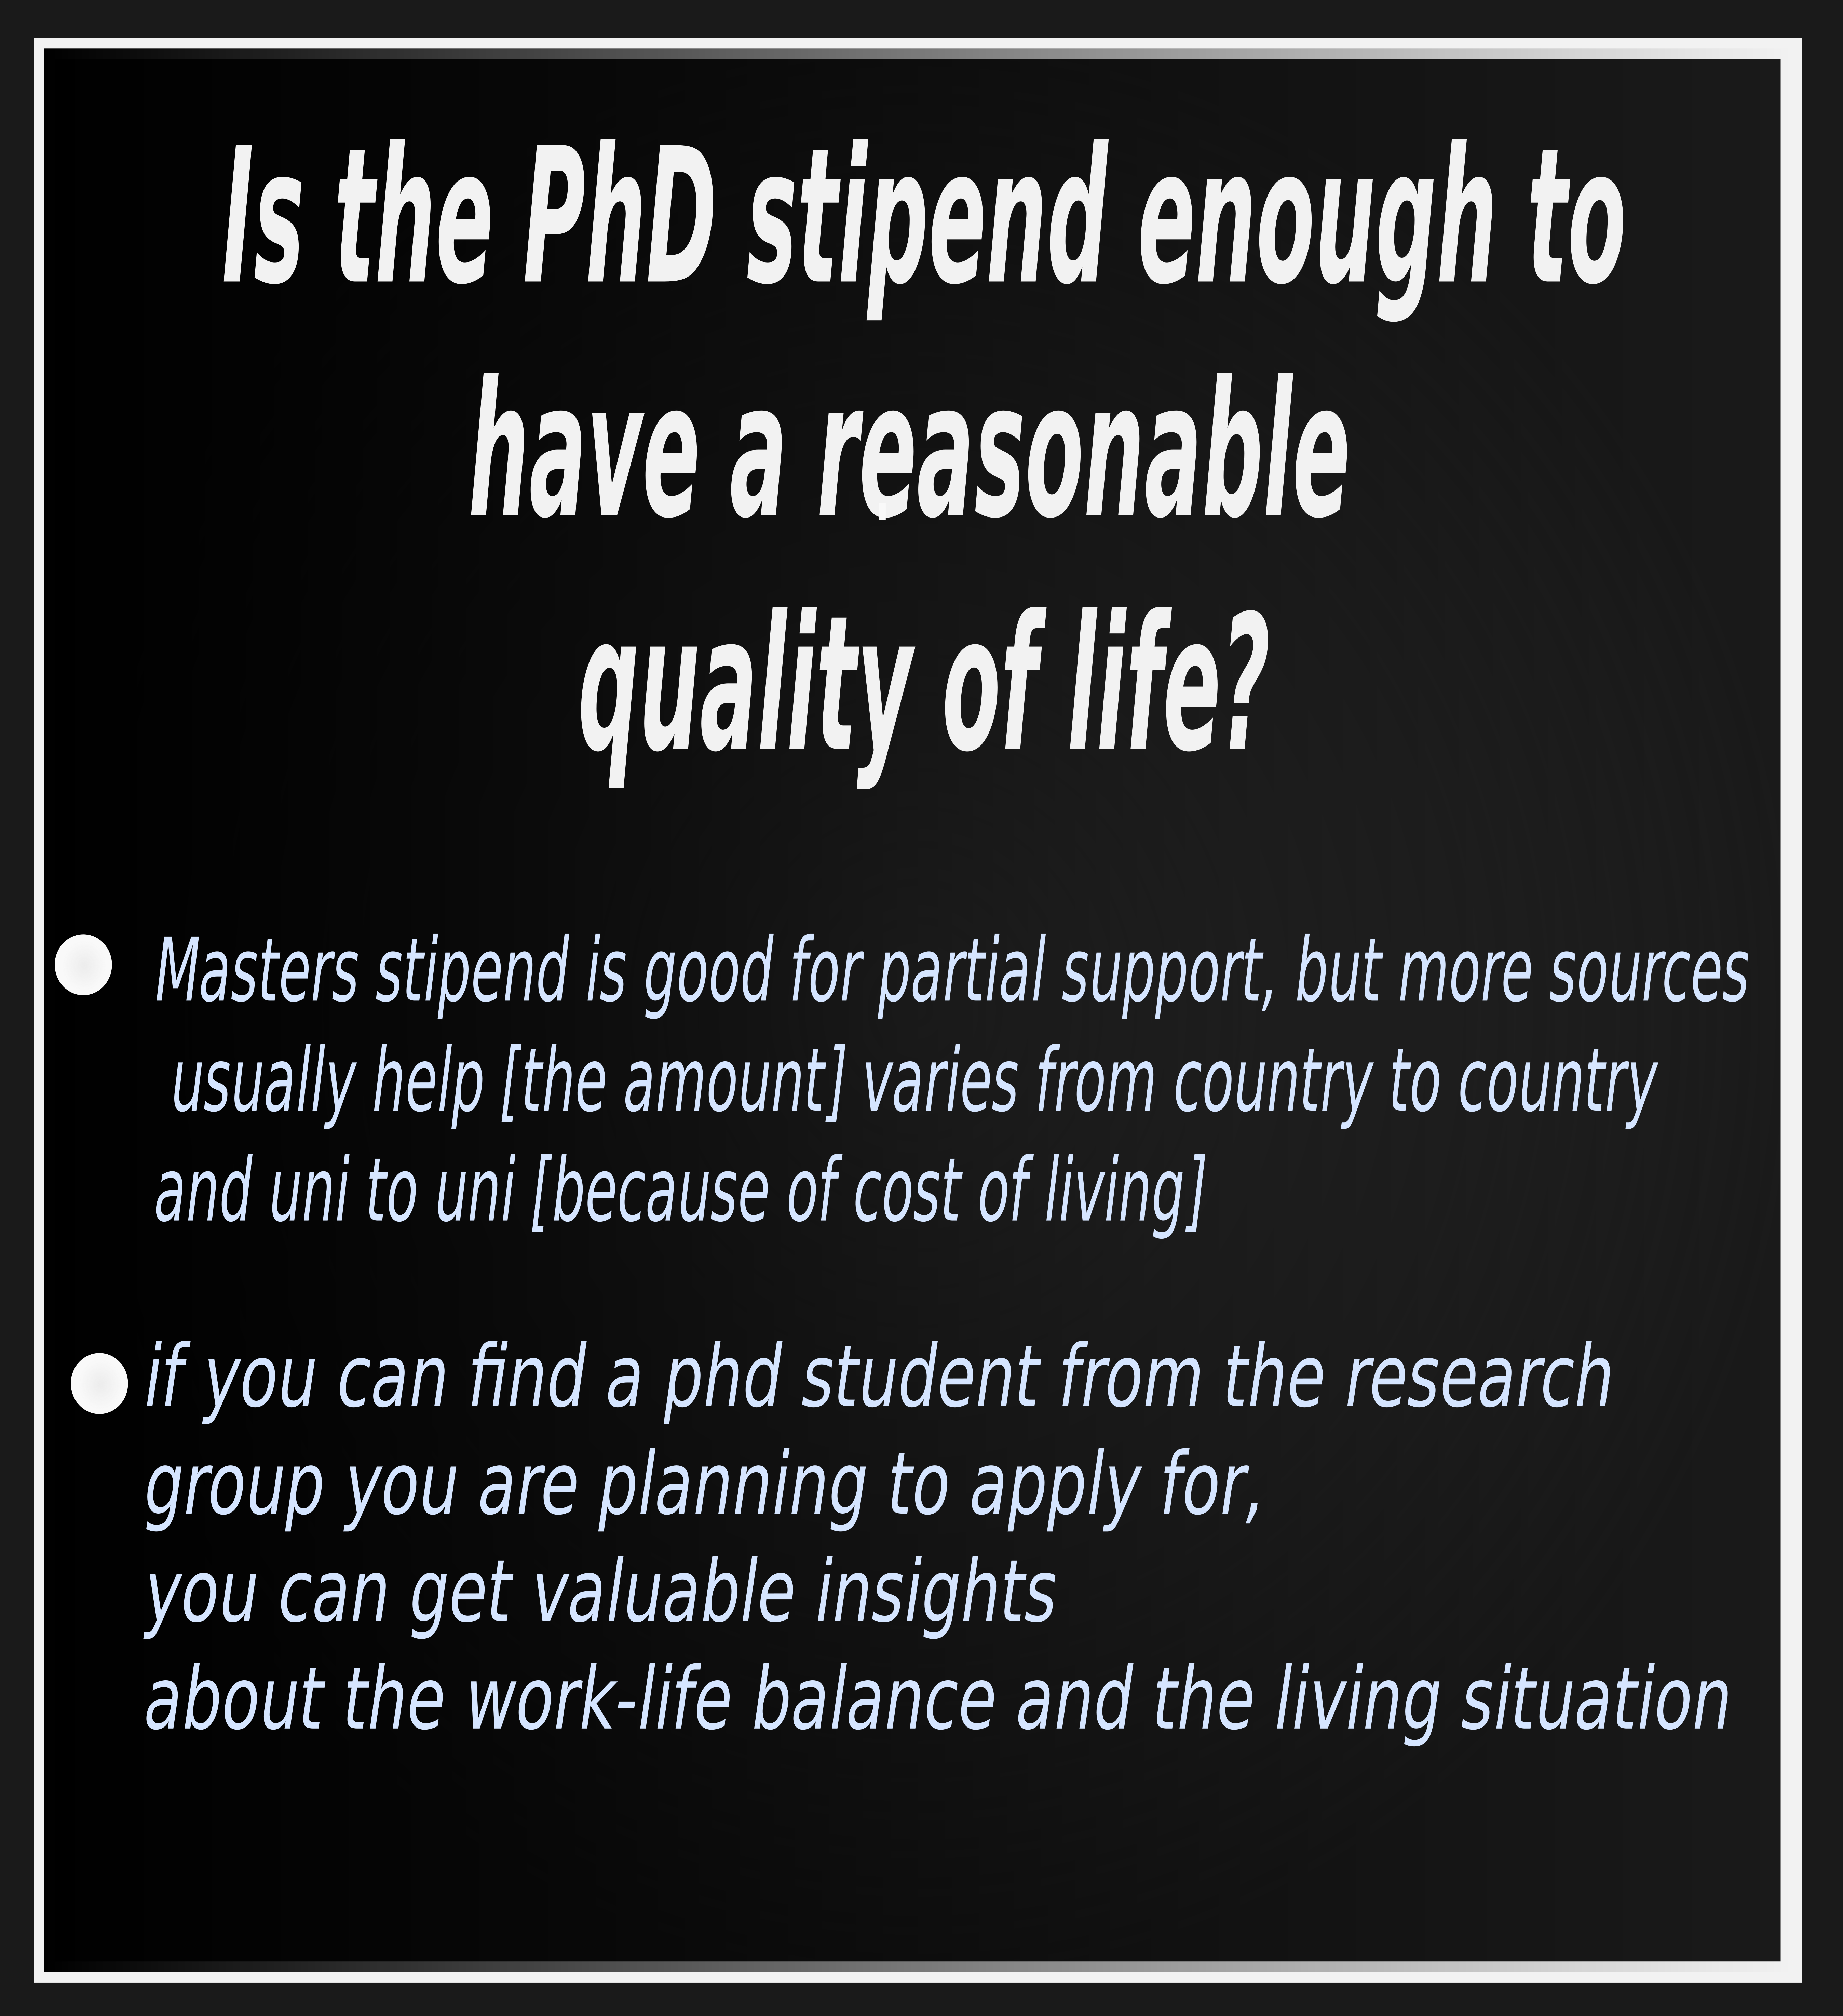 Is the PhD stipent enough to have a reasonable qualify of life?